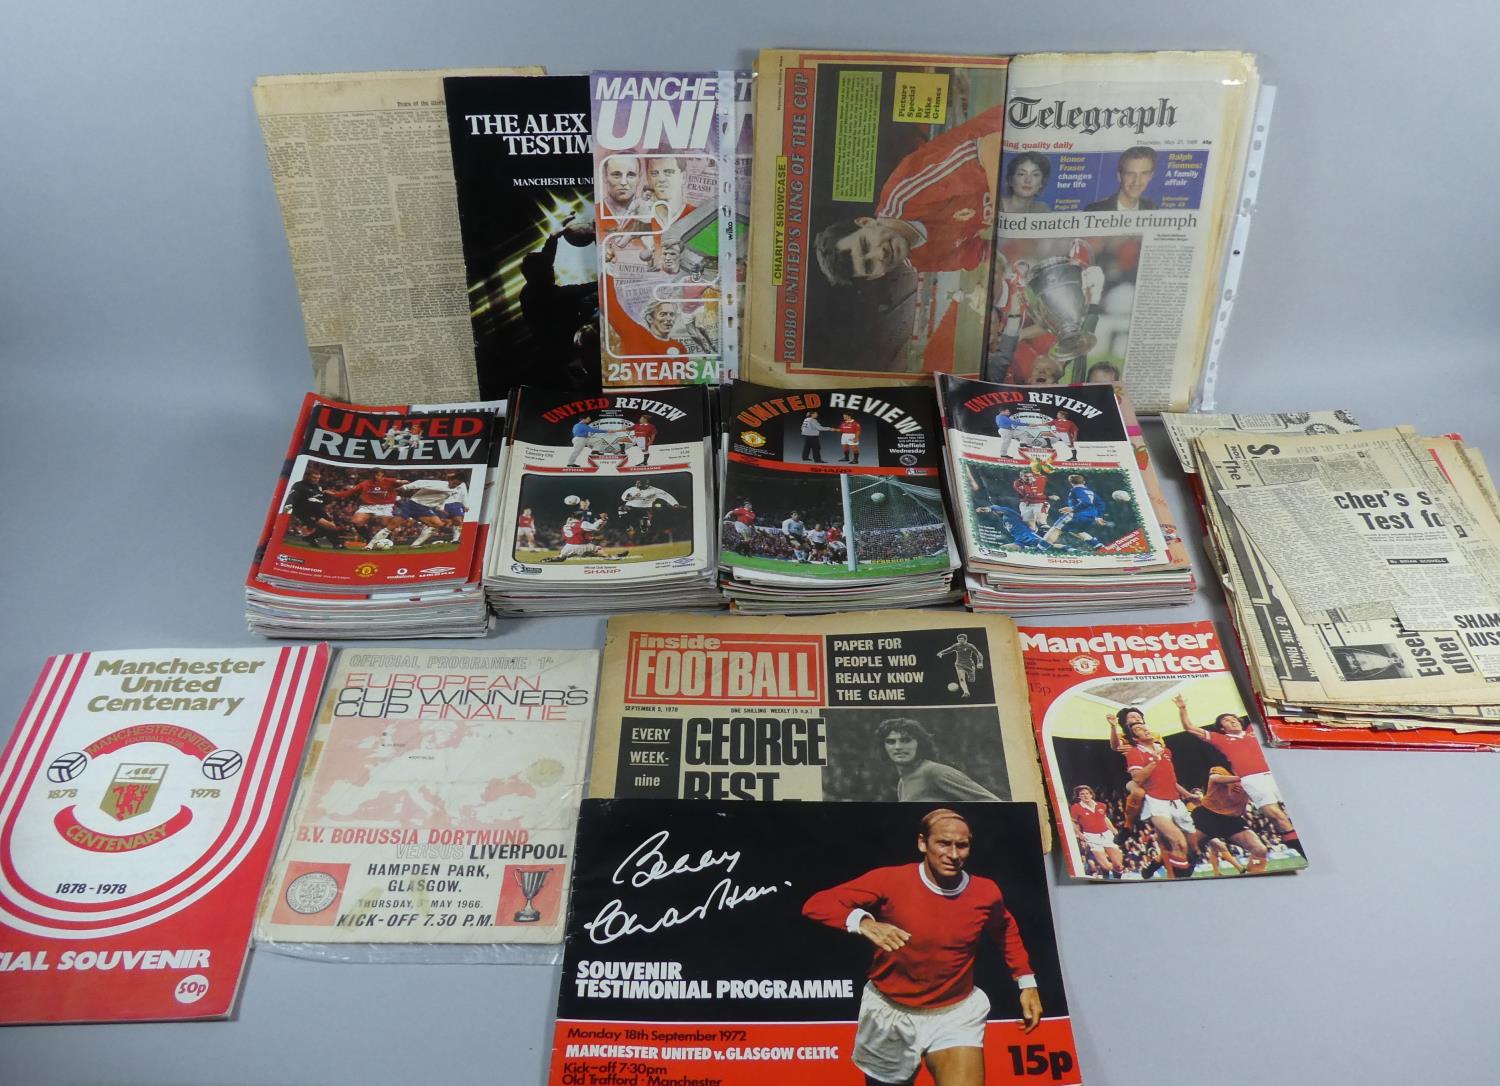 A Collection of 1990's Manchester United Football Programmes, Souvenirs, 1970 Inside Football